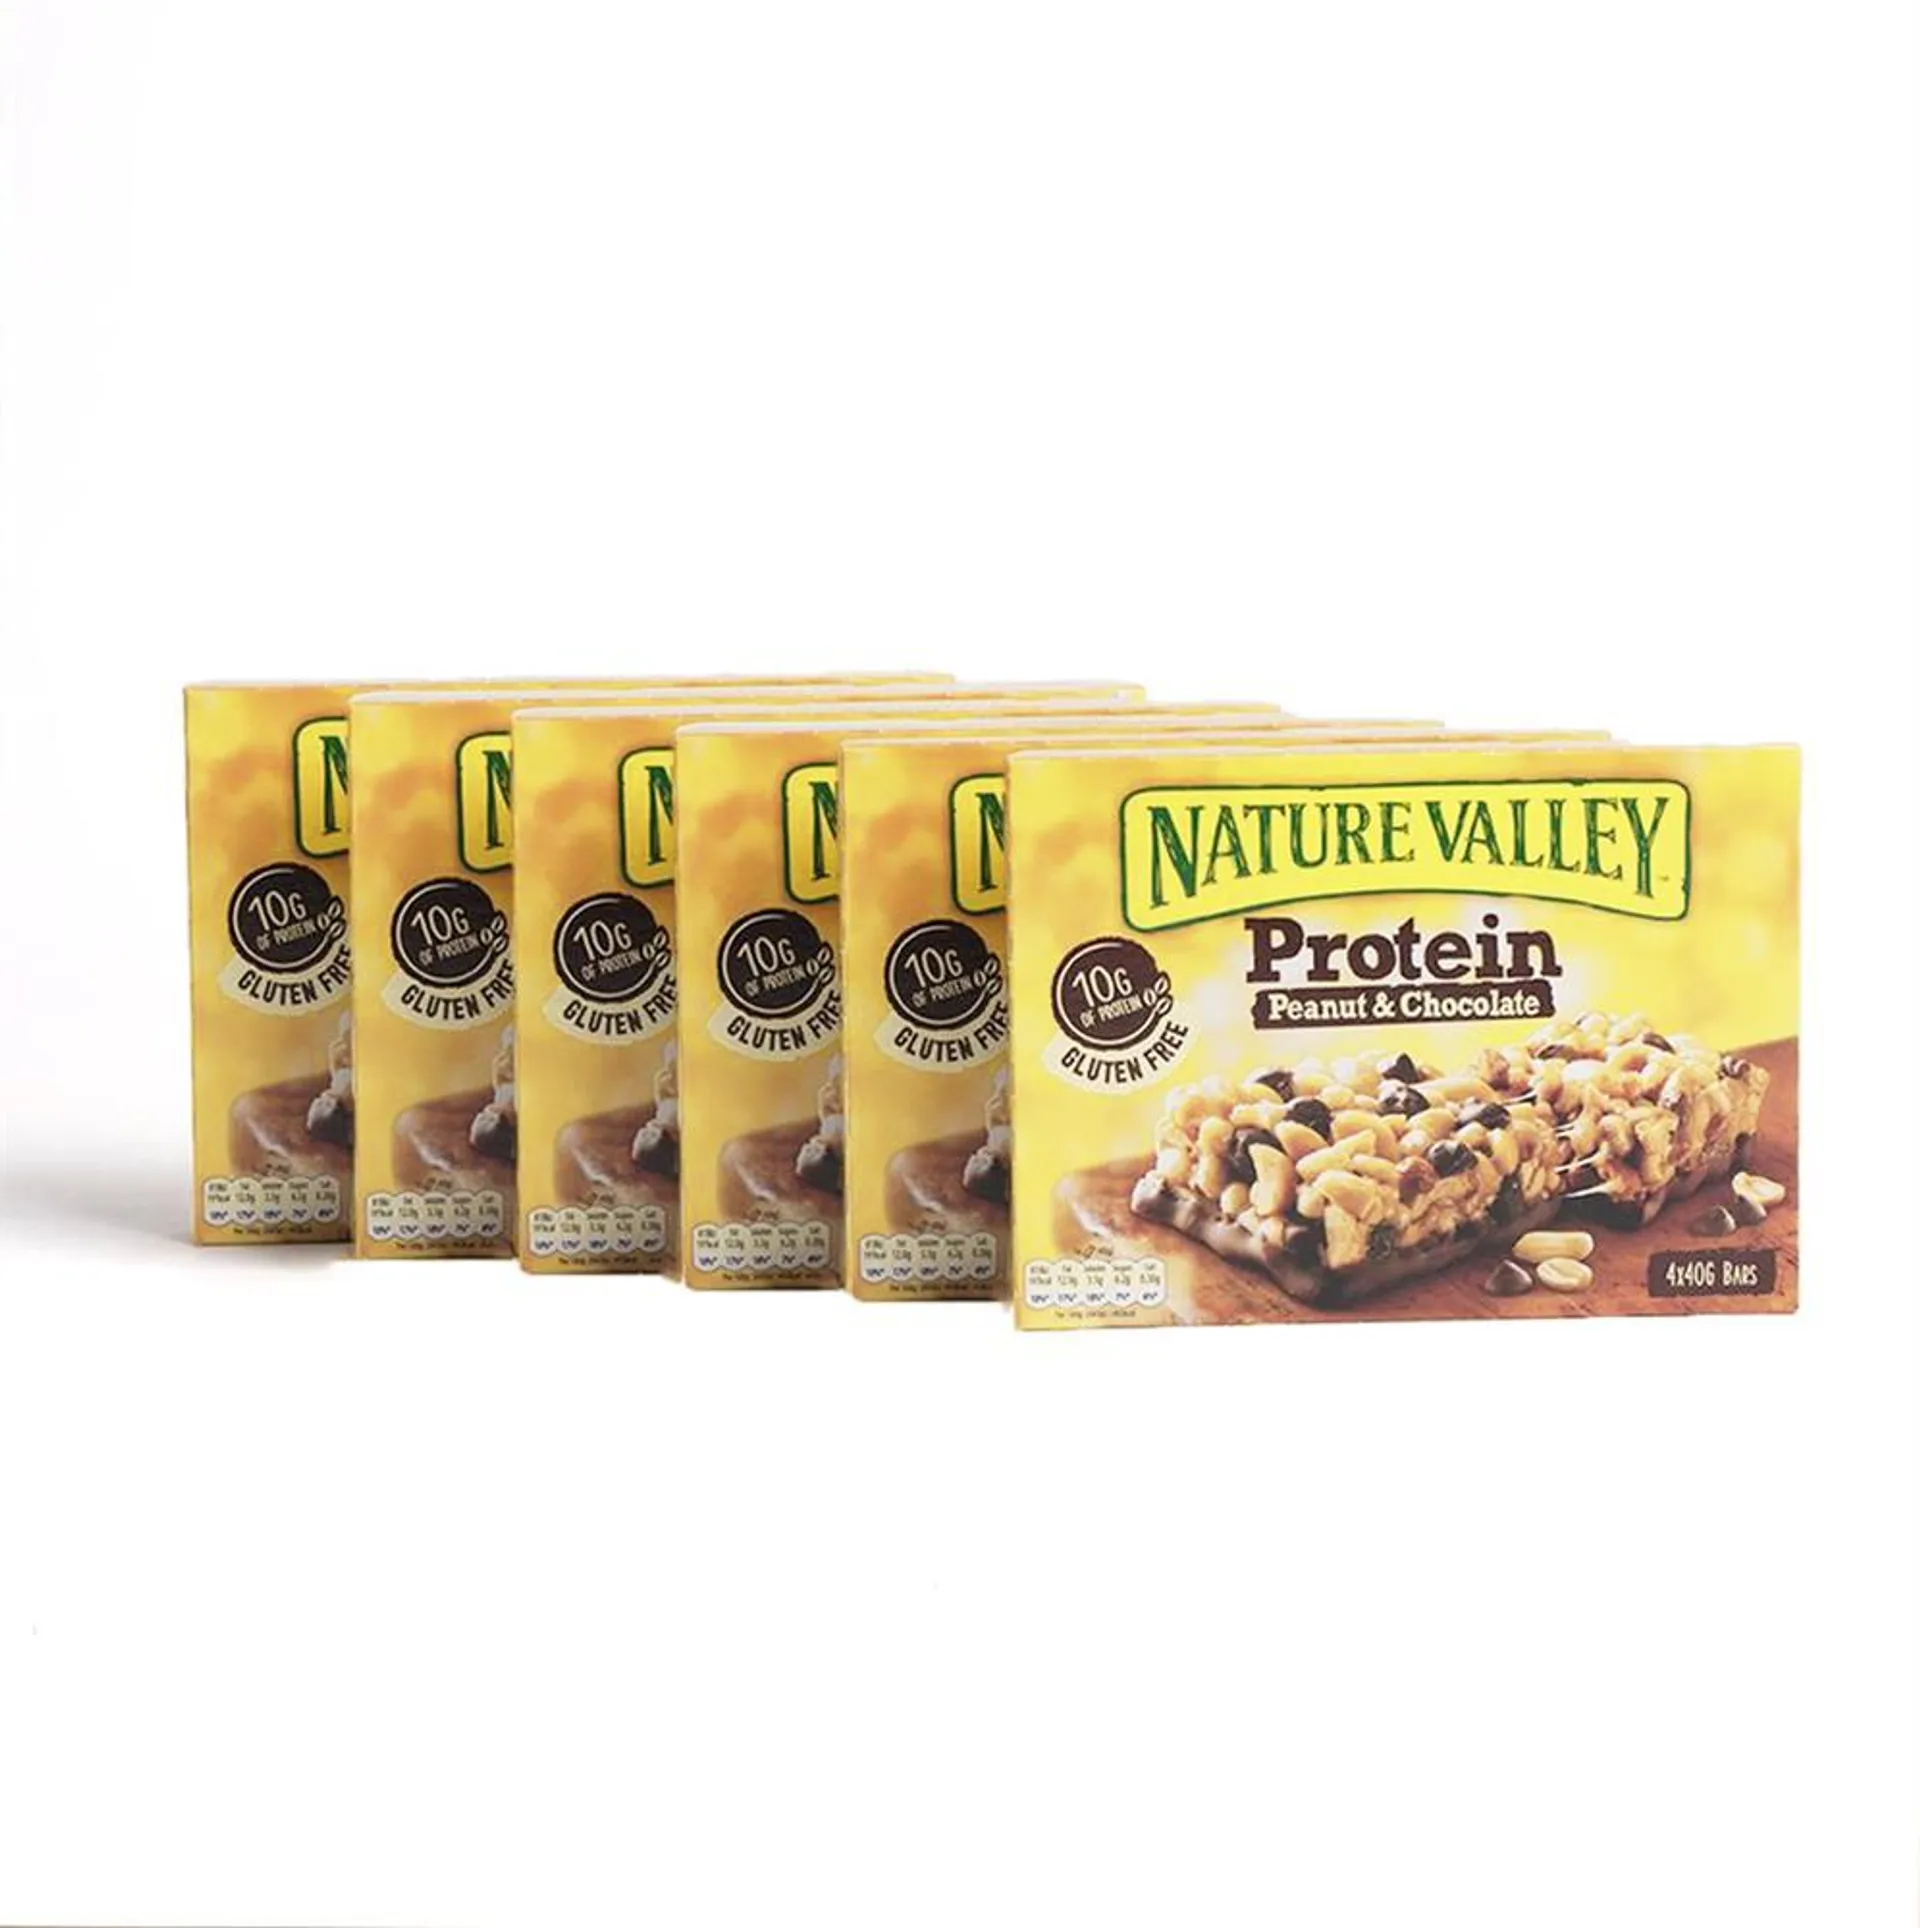 Nature Valley: Protein Cereal Bar 4 Pack 160g - Peanut & Chocolate (Case of 6)